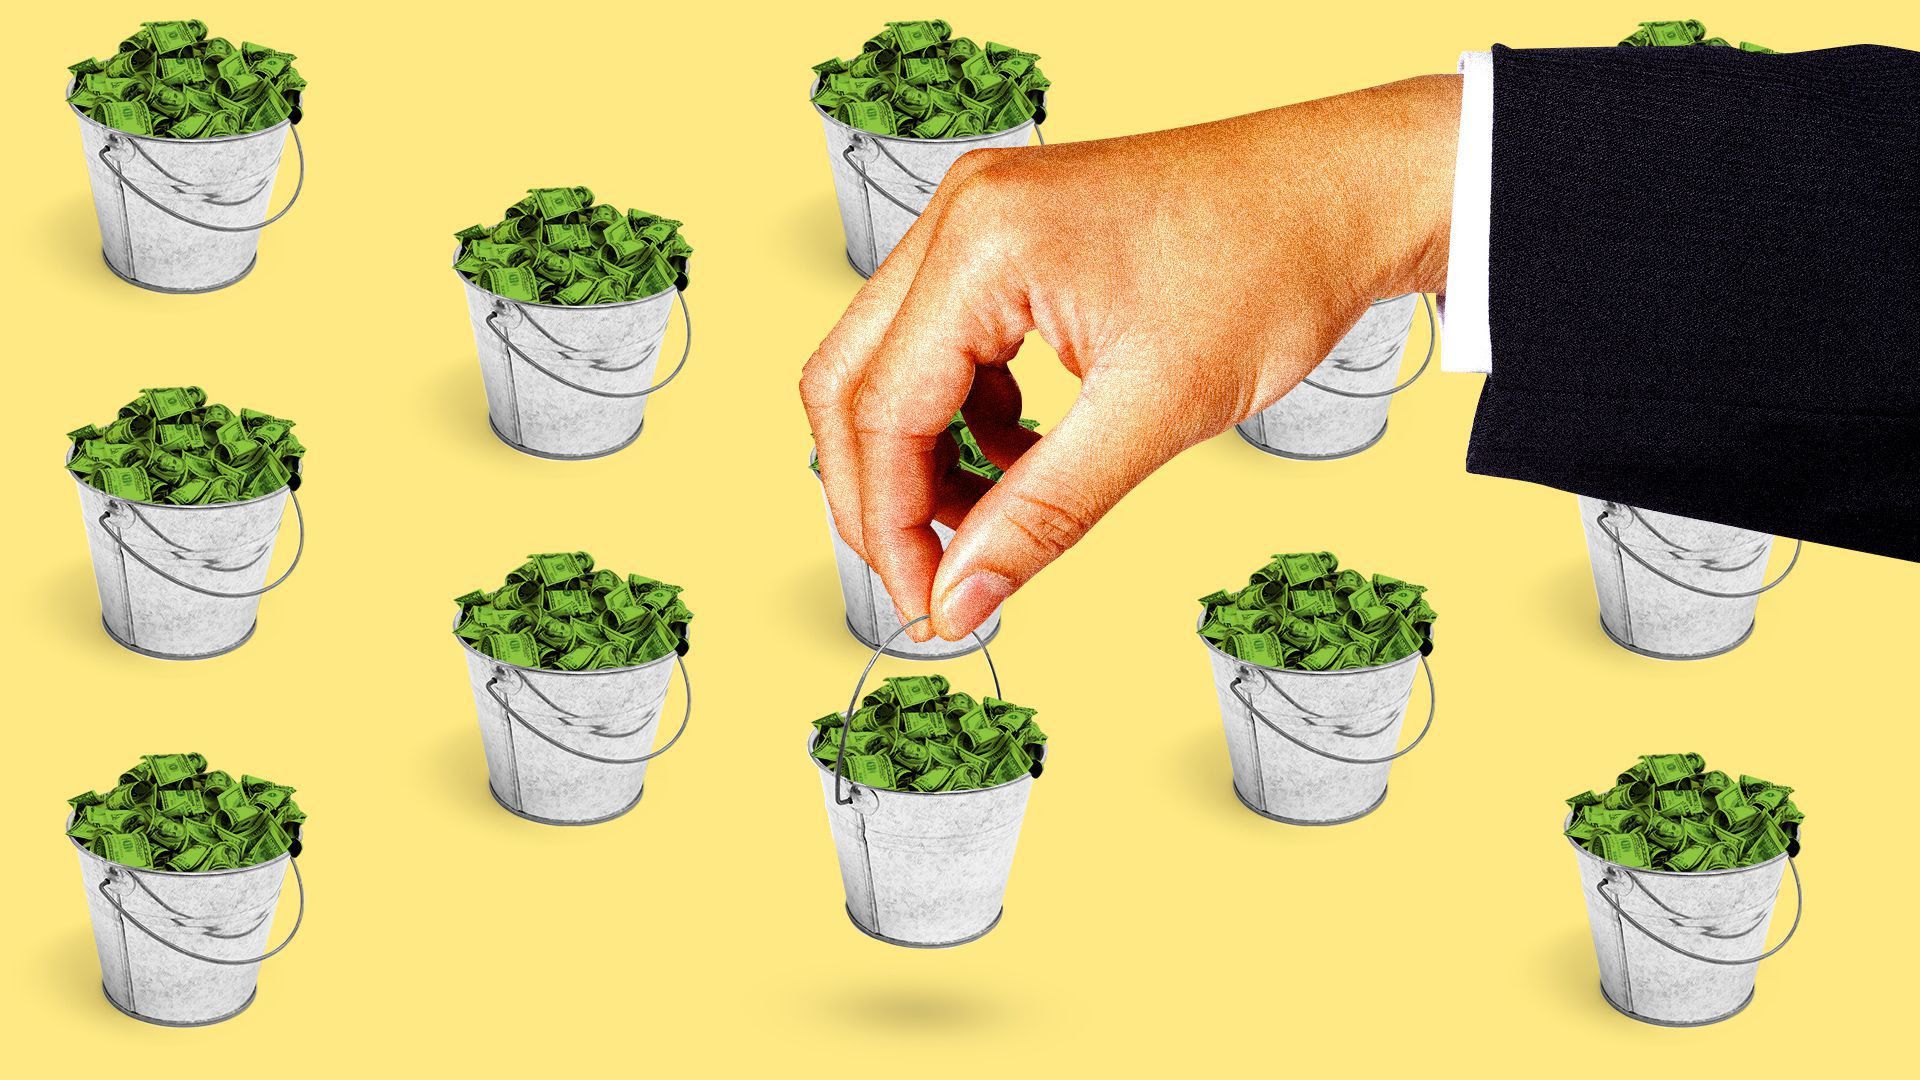 An illustration of a hand taking money out of a bucket.